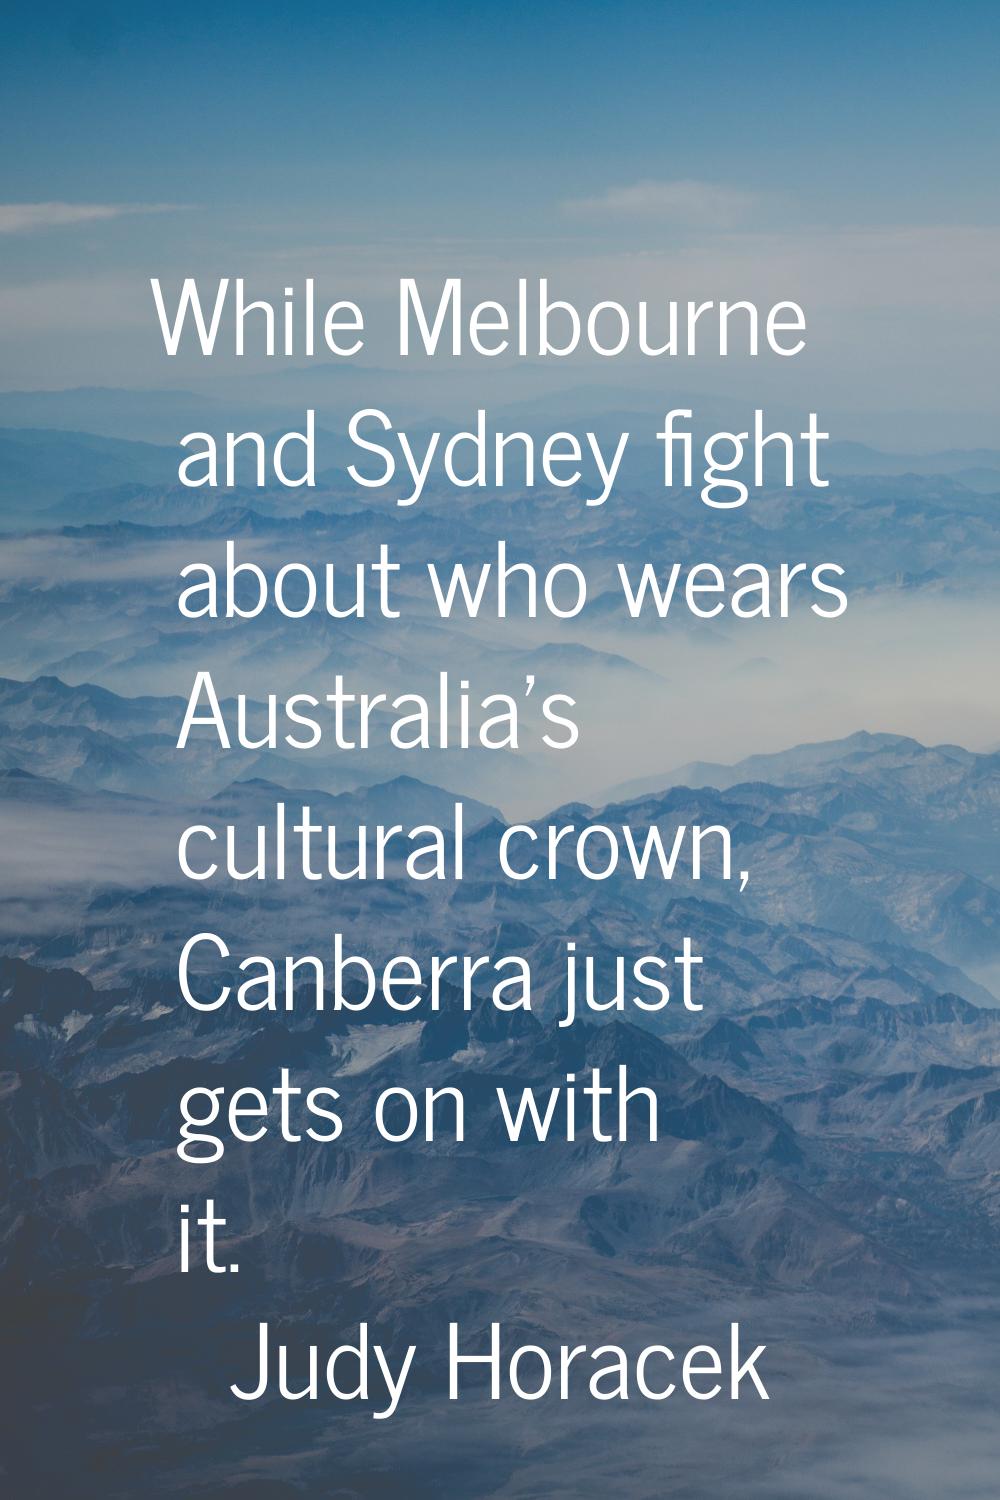 While Melbourne and Sydney fight about who wears Australia's cultural crown, Canberra just gets on 